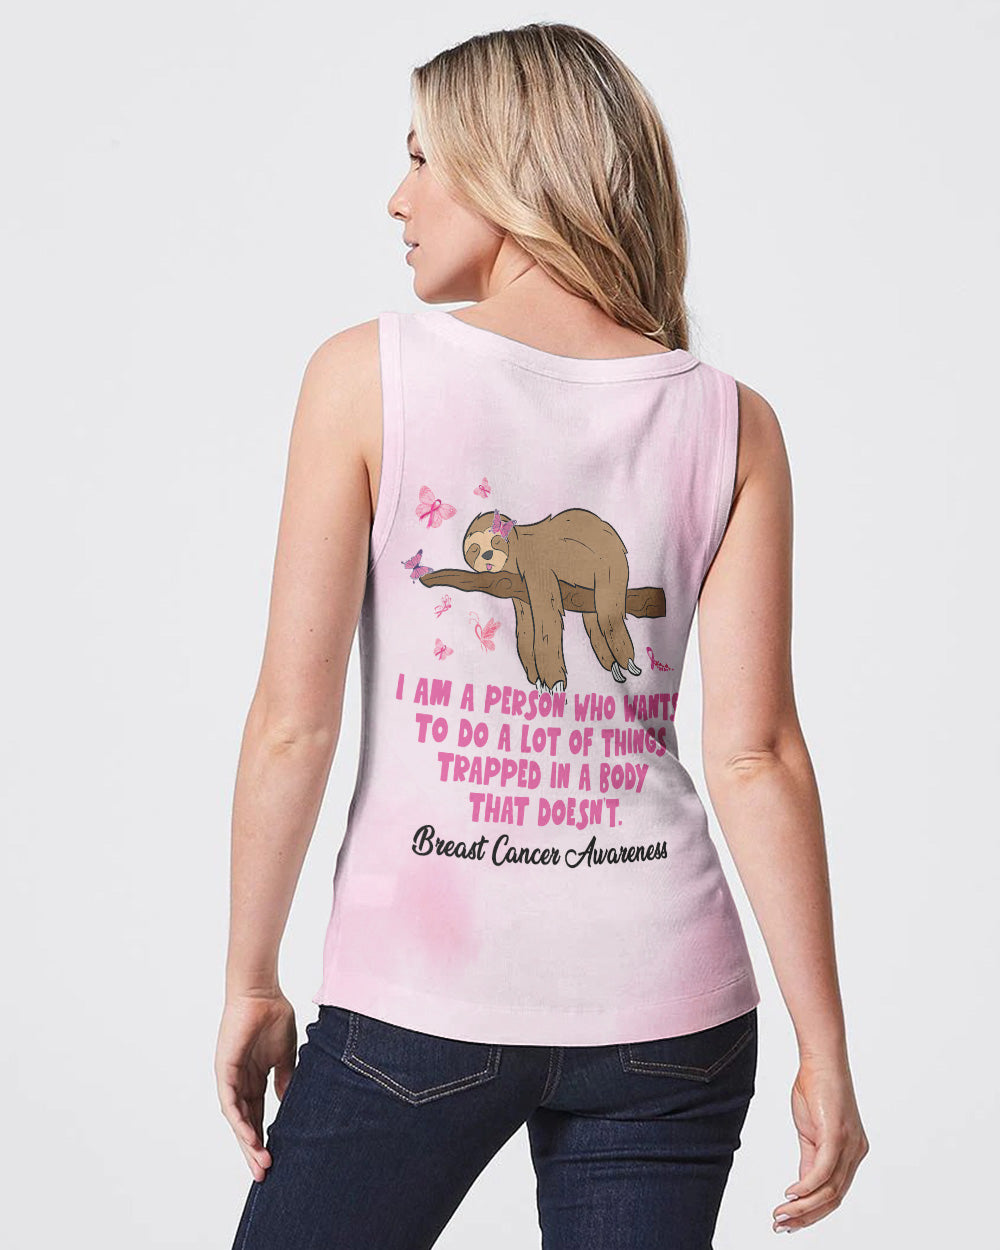 I Am A Person Who Want To Do A Lot Sloth Women's Breast Cancer Awareness Tanks